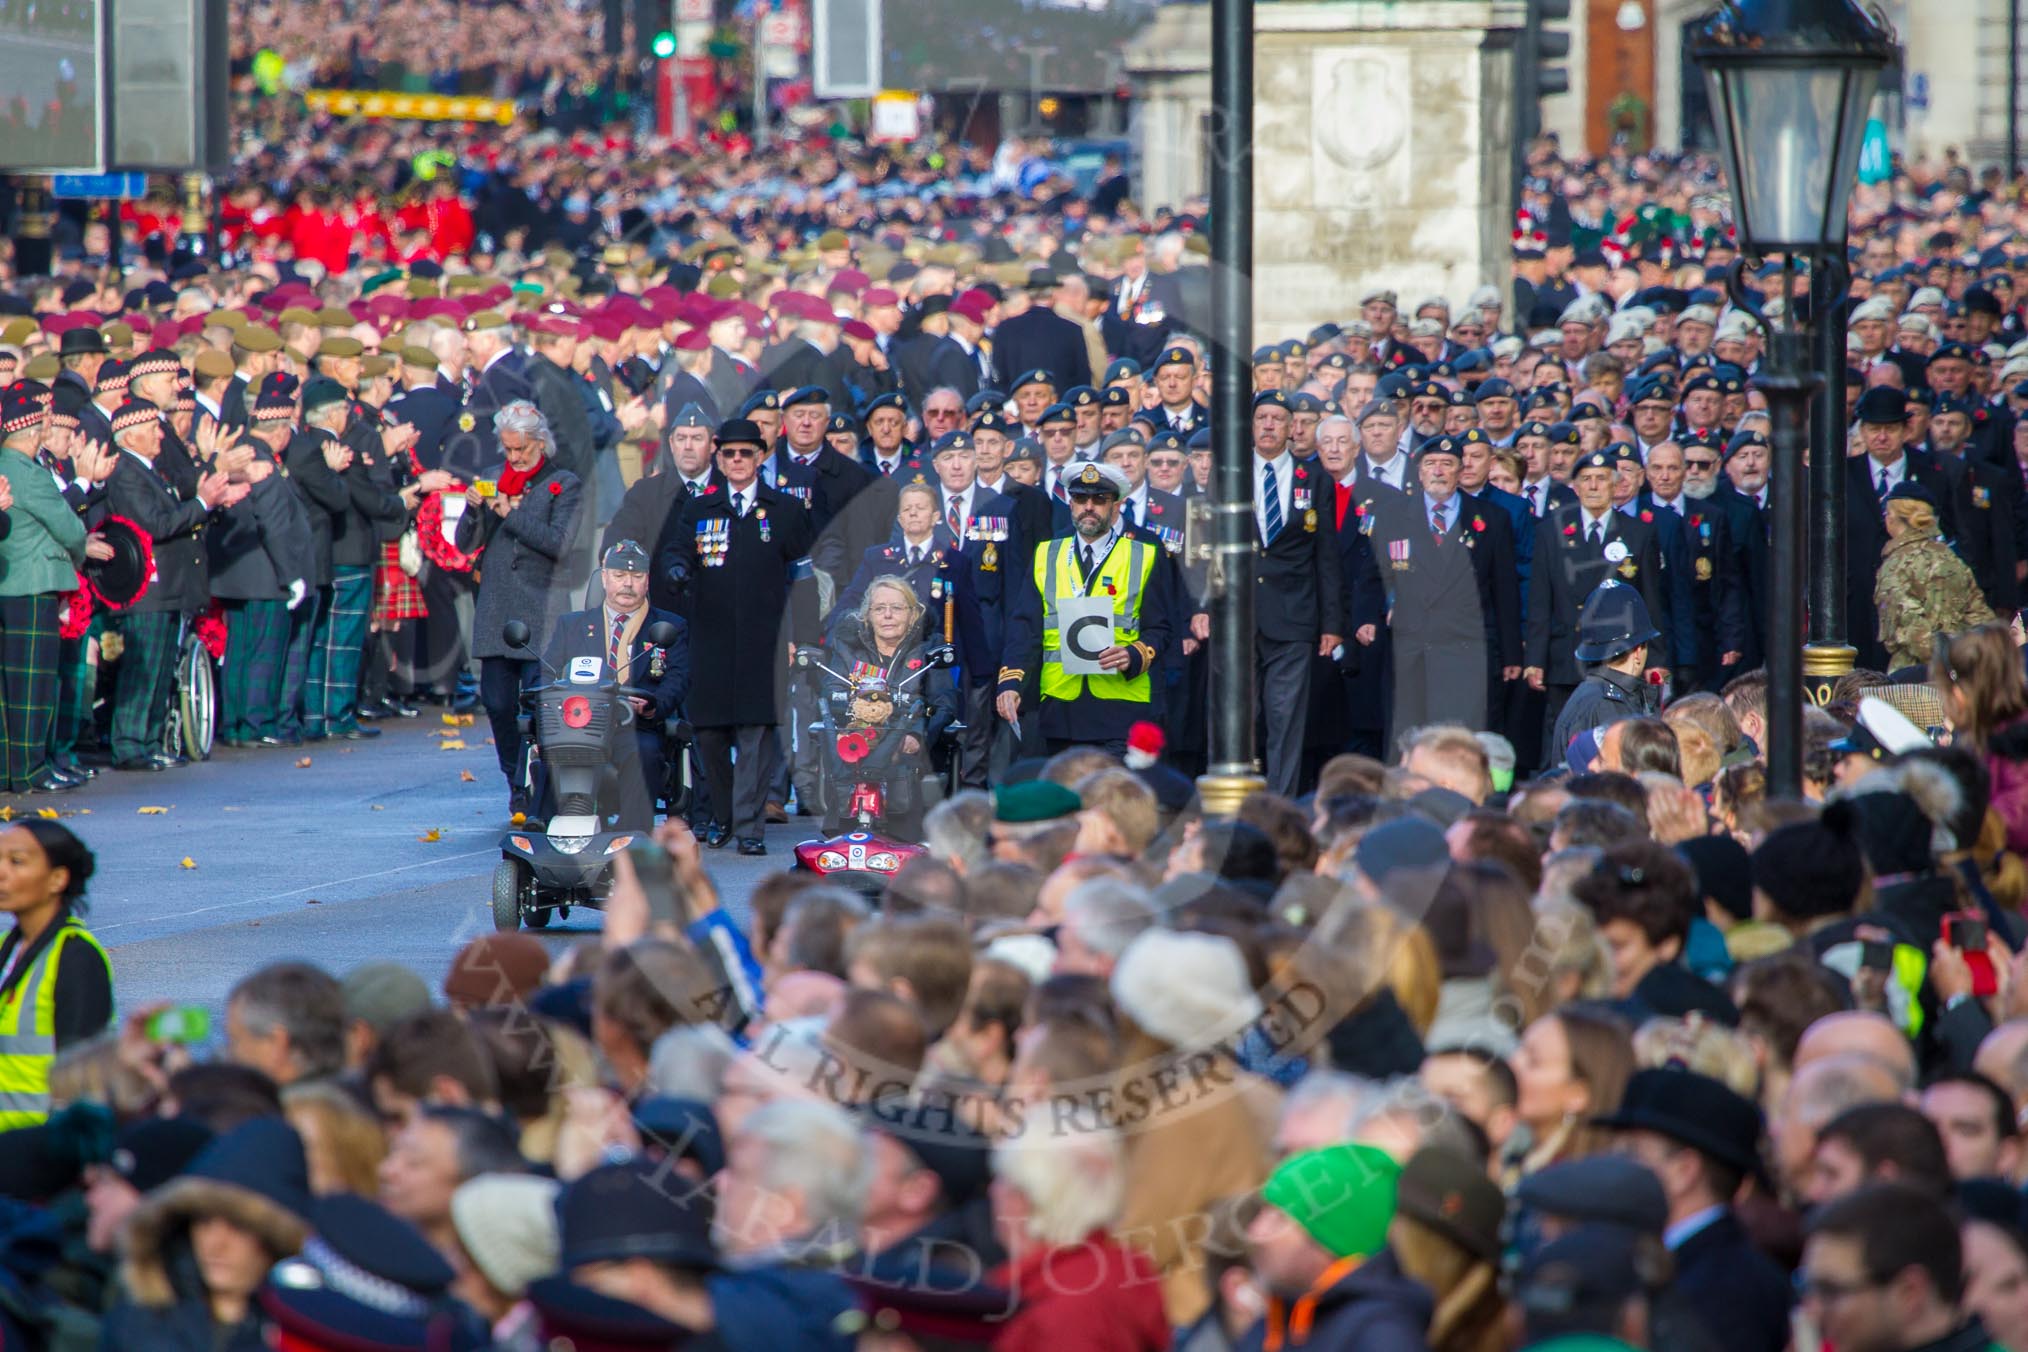 Column C of the March Past arrives on Whitehall after a long wait on Horse Guards Parade before the Remembrance Sunday Cenotaph Ceremony 2018 at Horse Guards Parade, Westminster, London, 11 November 2018, 10:42.